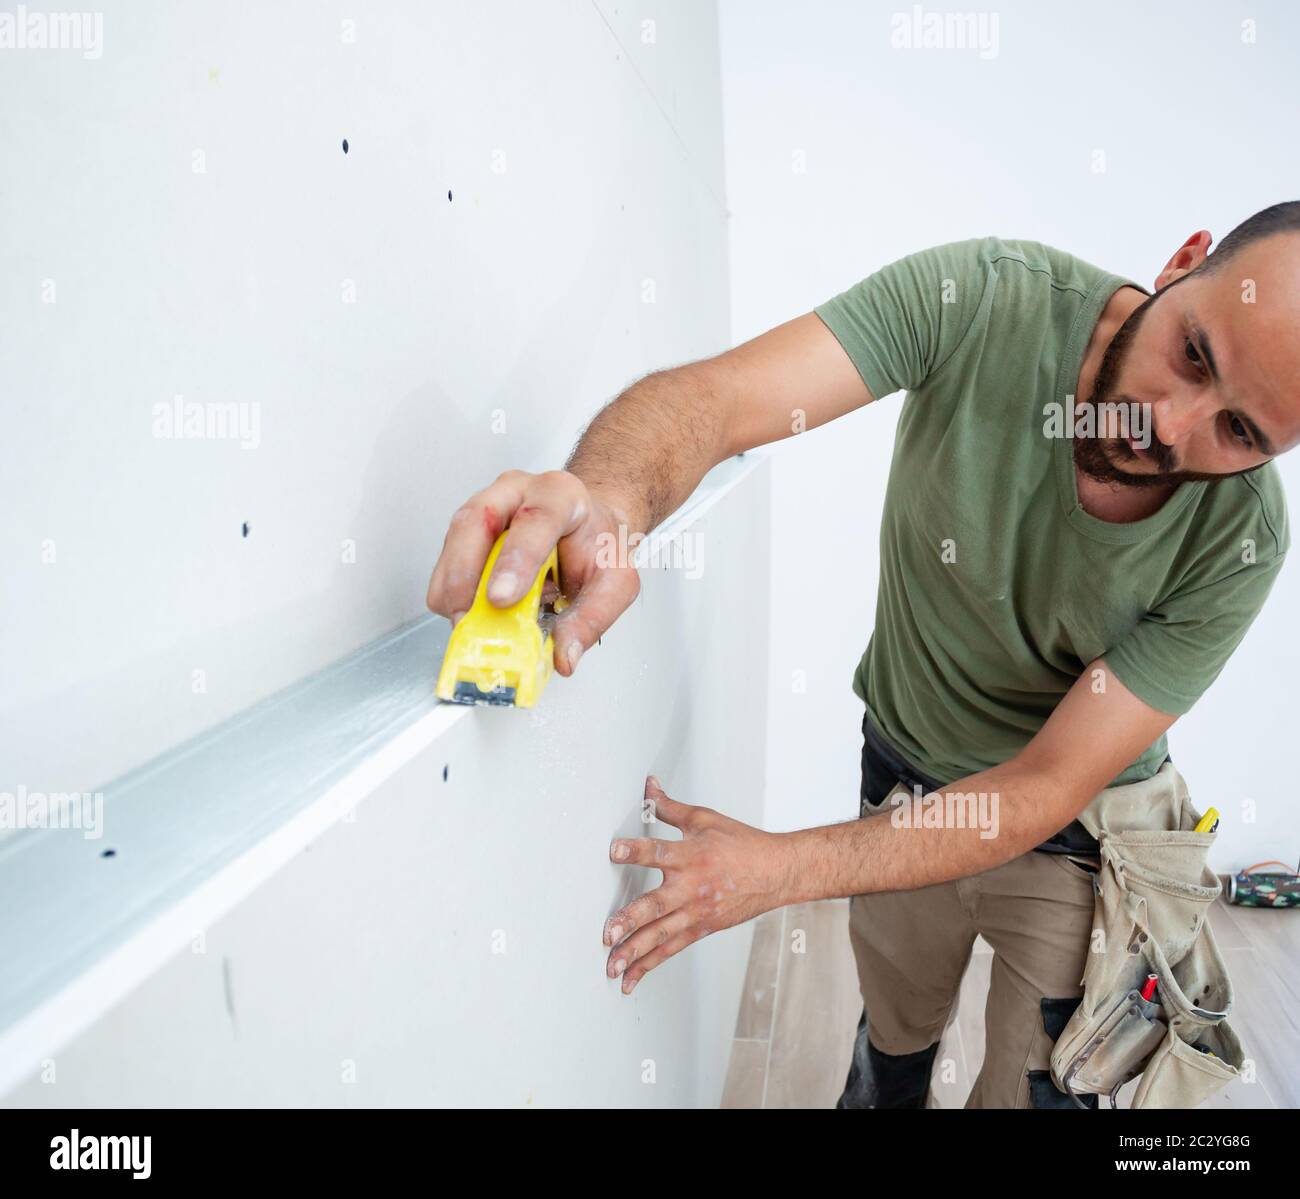 Worker building plasterboard wall. Working with cutting tools, fixing and measuring for drywall. Stock Photo